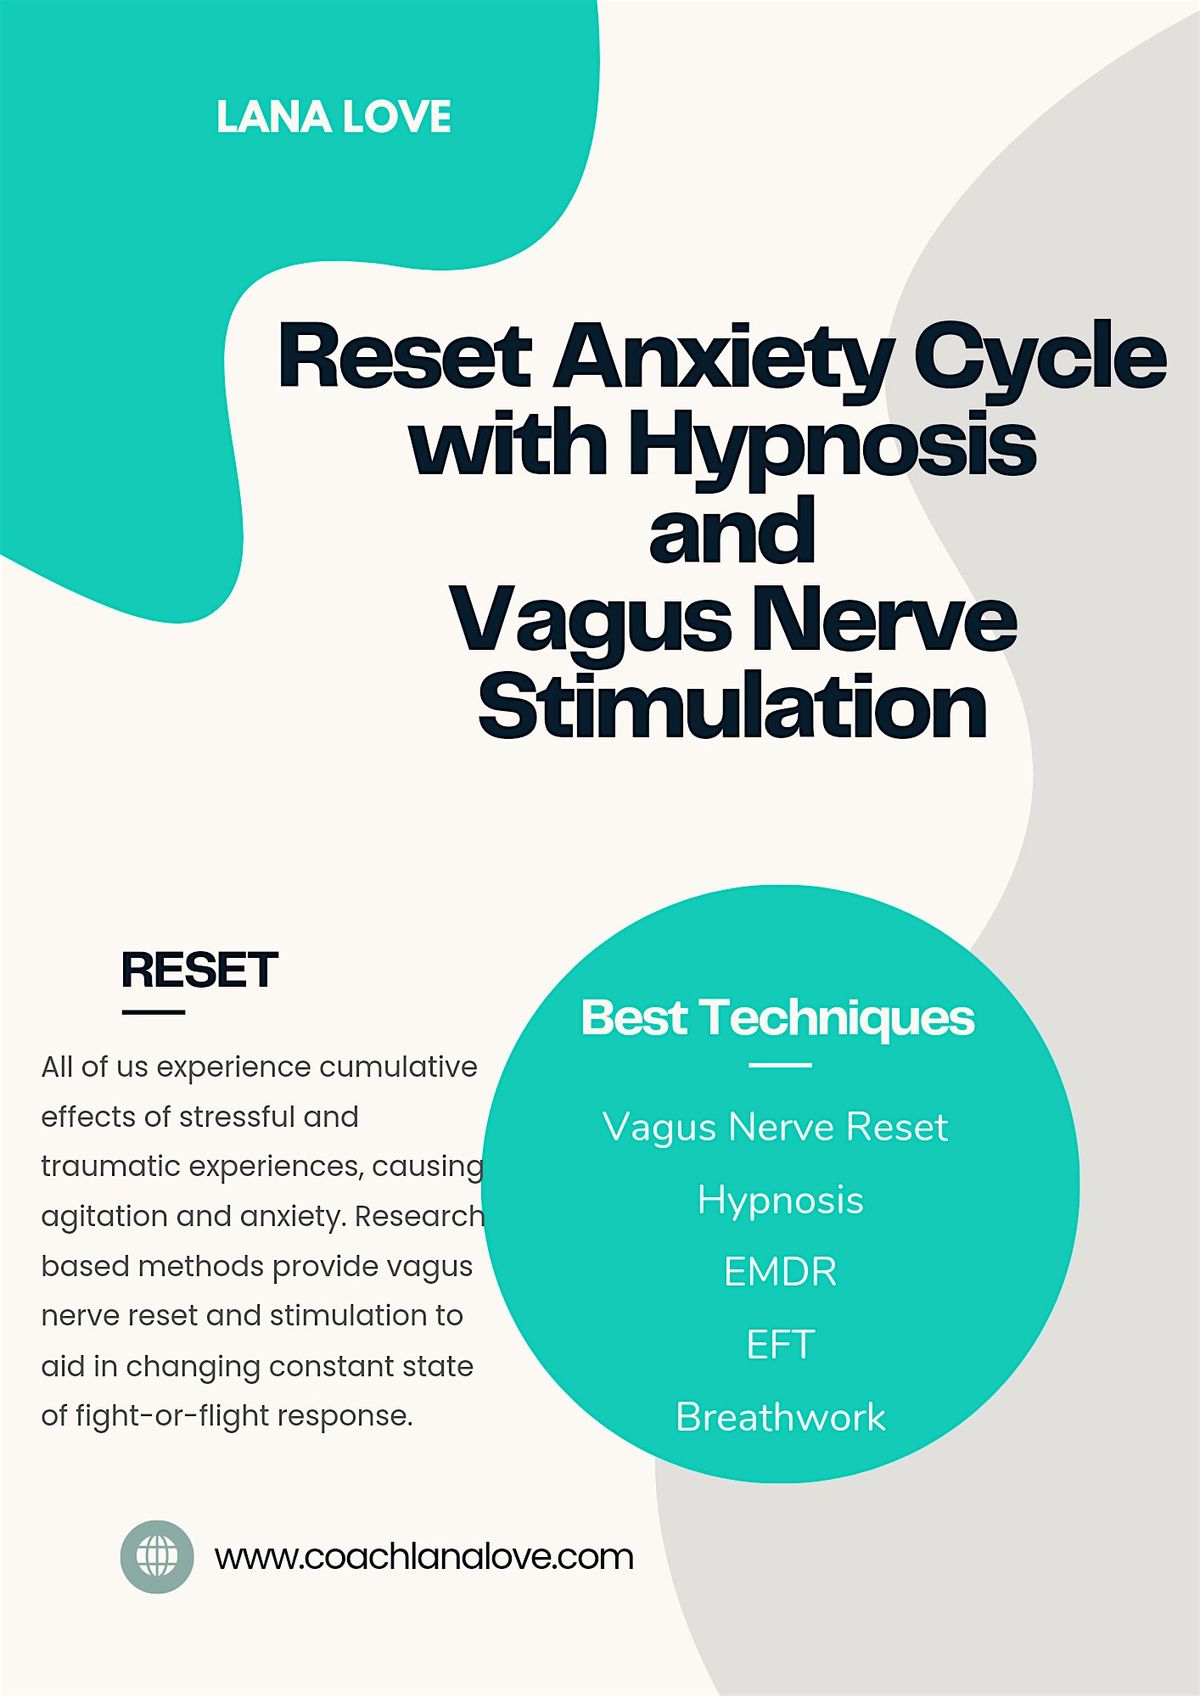 Reset Anxiety Cycle with Hypnosis & Vagus Nerve Stimulation